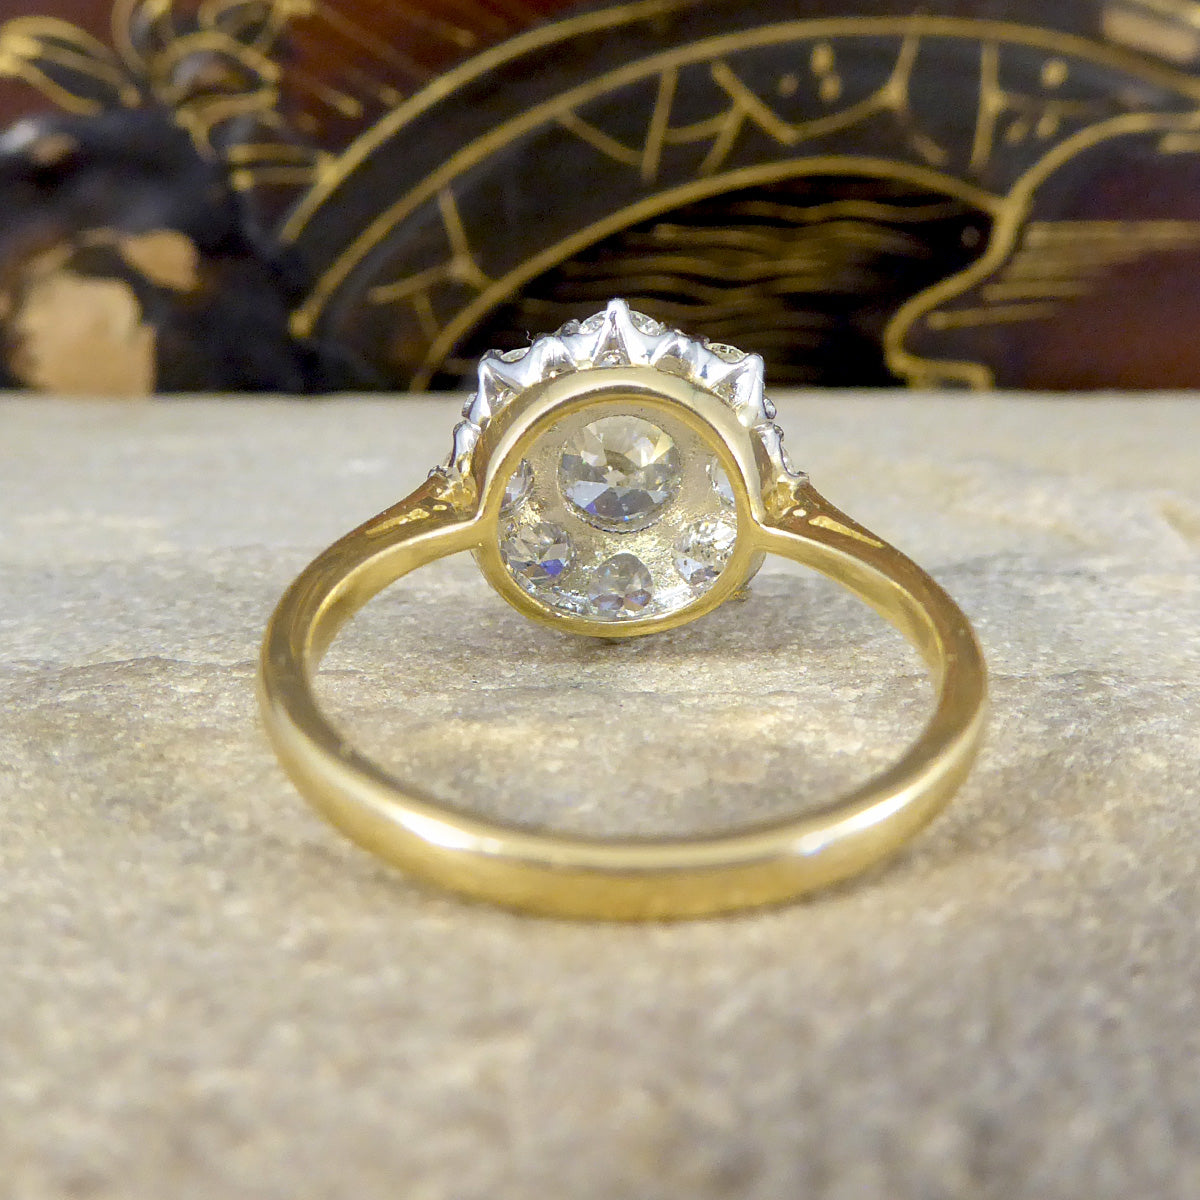 Edwardian Style 1.85ct Old Cut Diamond Daisy Cluster Ring in 18ct Yellow Gold